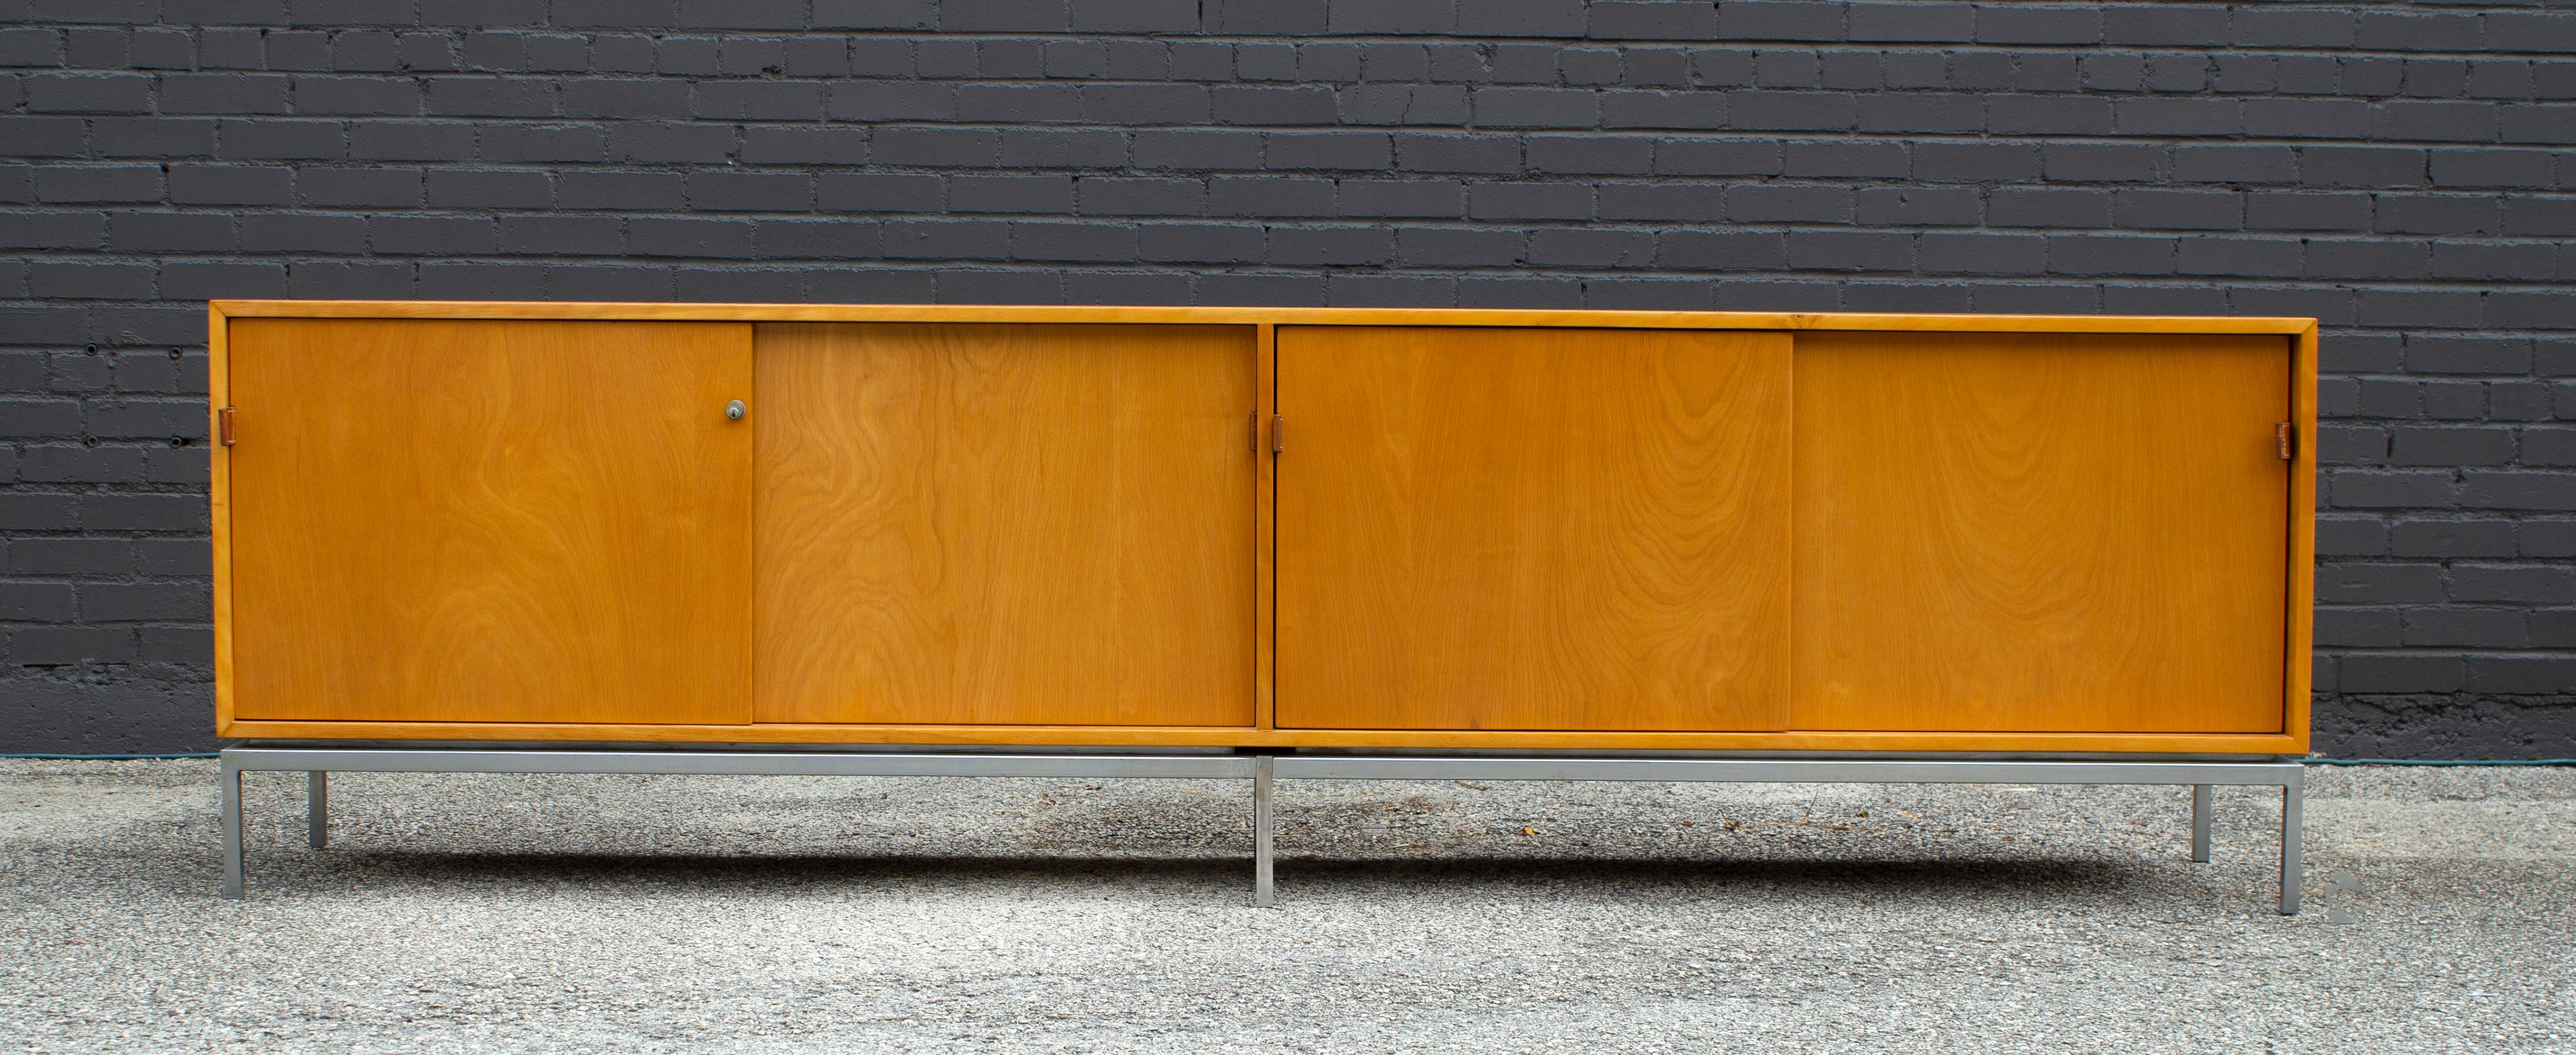 American Florence Knoll Maple Credenza with Leather Pulls and Oak Drawers Early 1950s For Sale